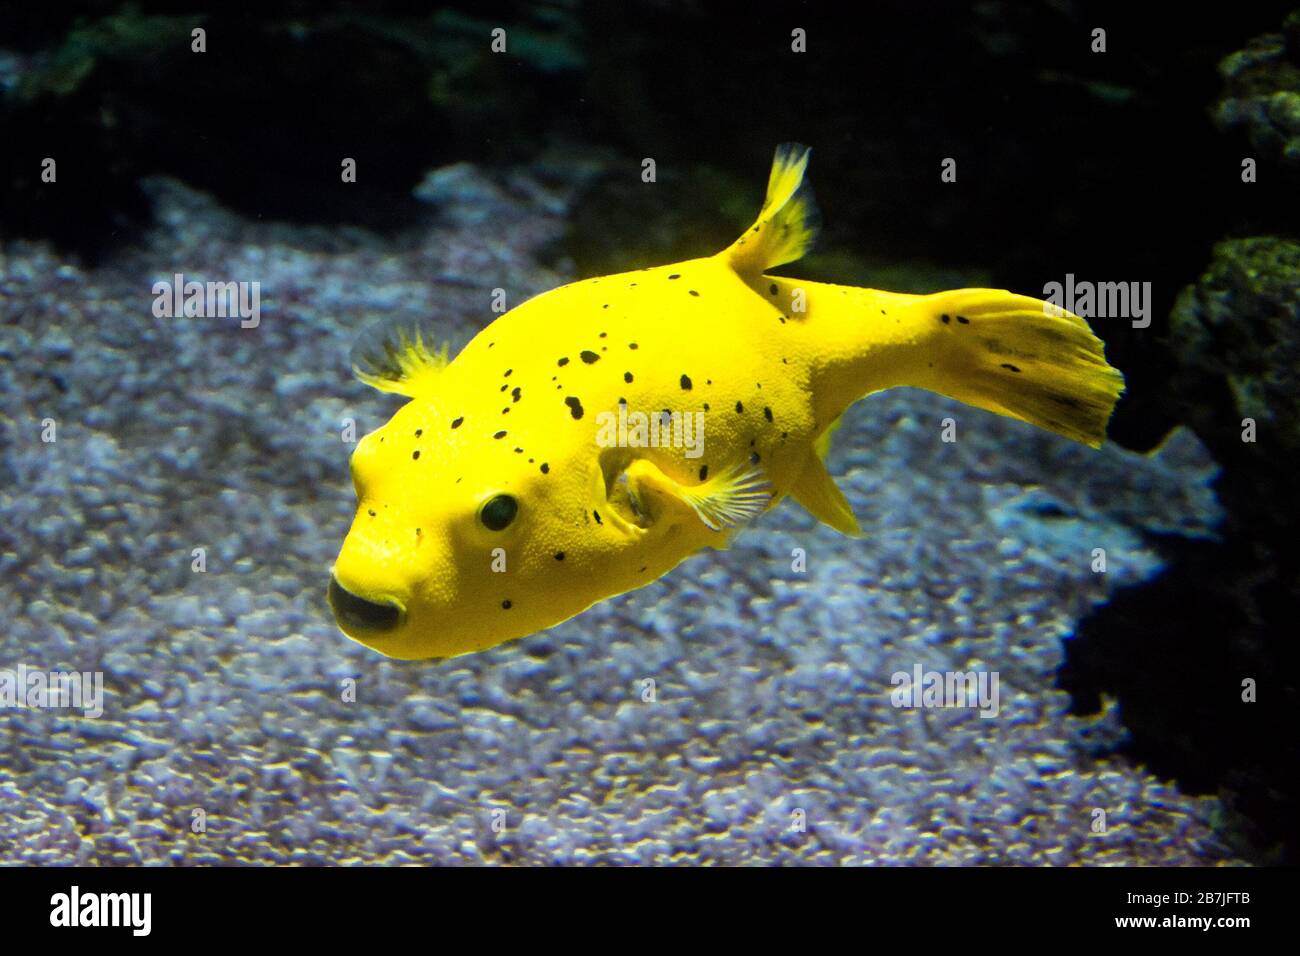 The blackspotted puffer (Arothron nigropunctatus). The dog-faced puffer fish, is a tropical marine fish belonging to the family Tetraodontidae. Stock Photo